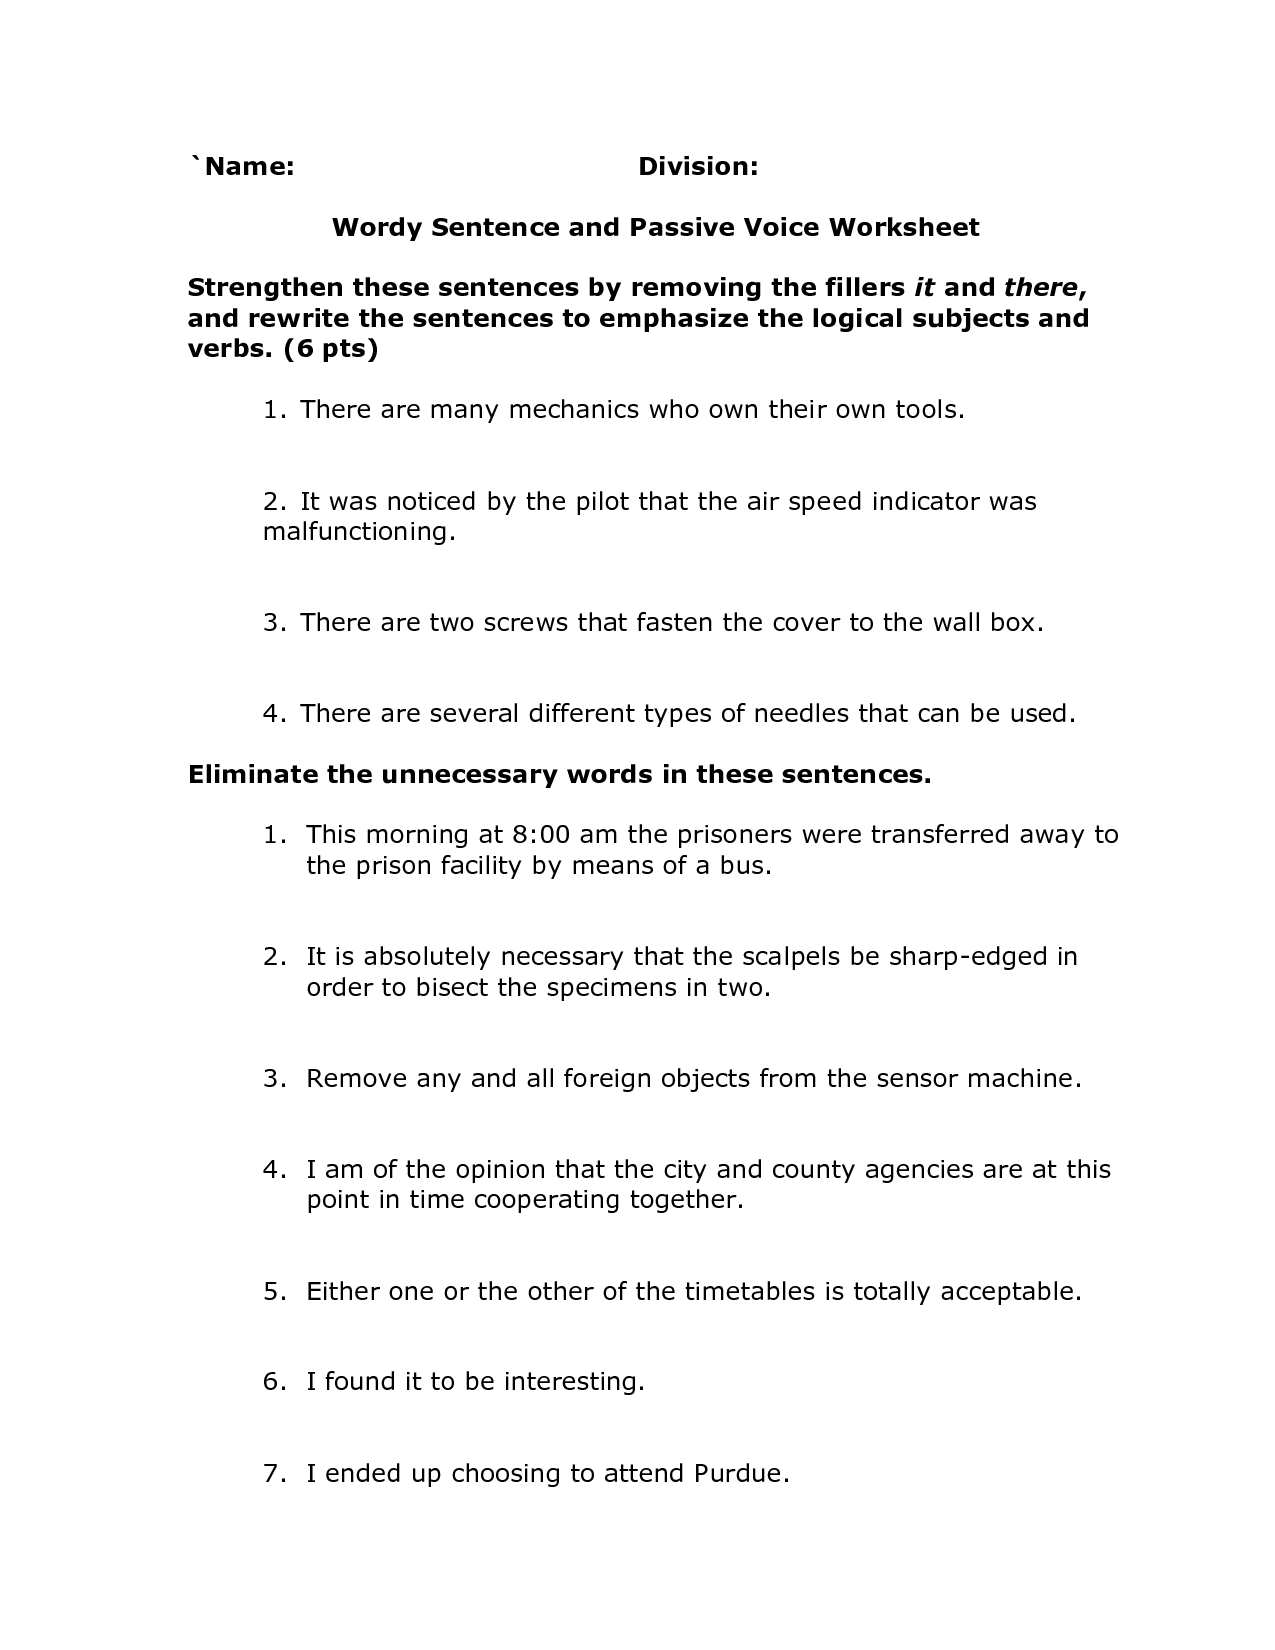 11-best-images-of-active-passive-voice-worksheet-active-and-passive-voice-passive-cell